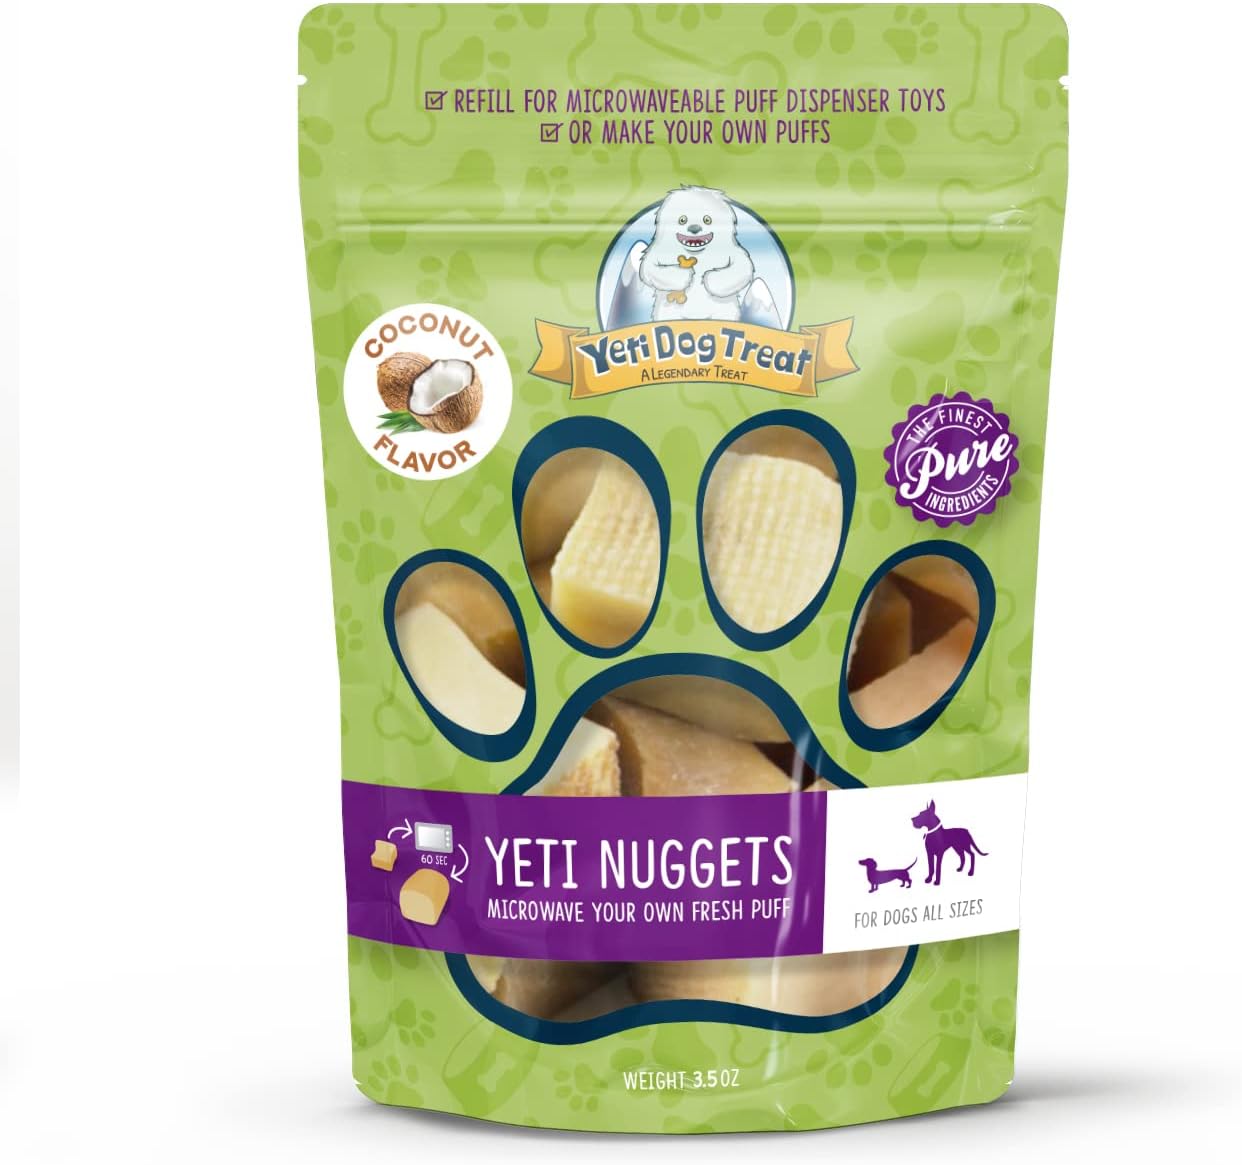 Yeti Nuggets (6 pieces)